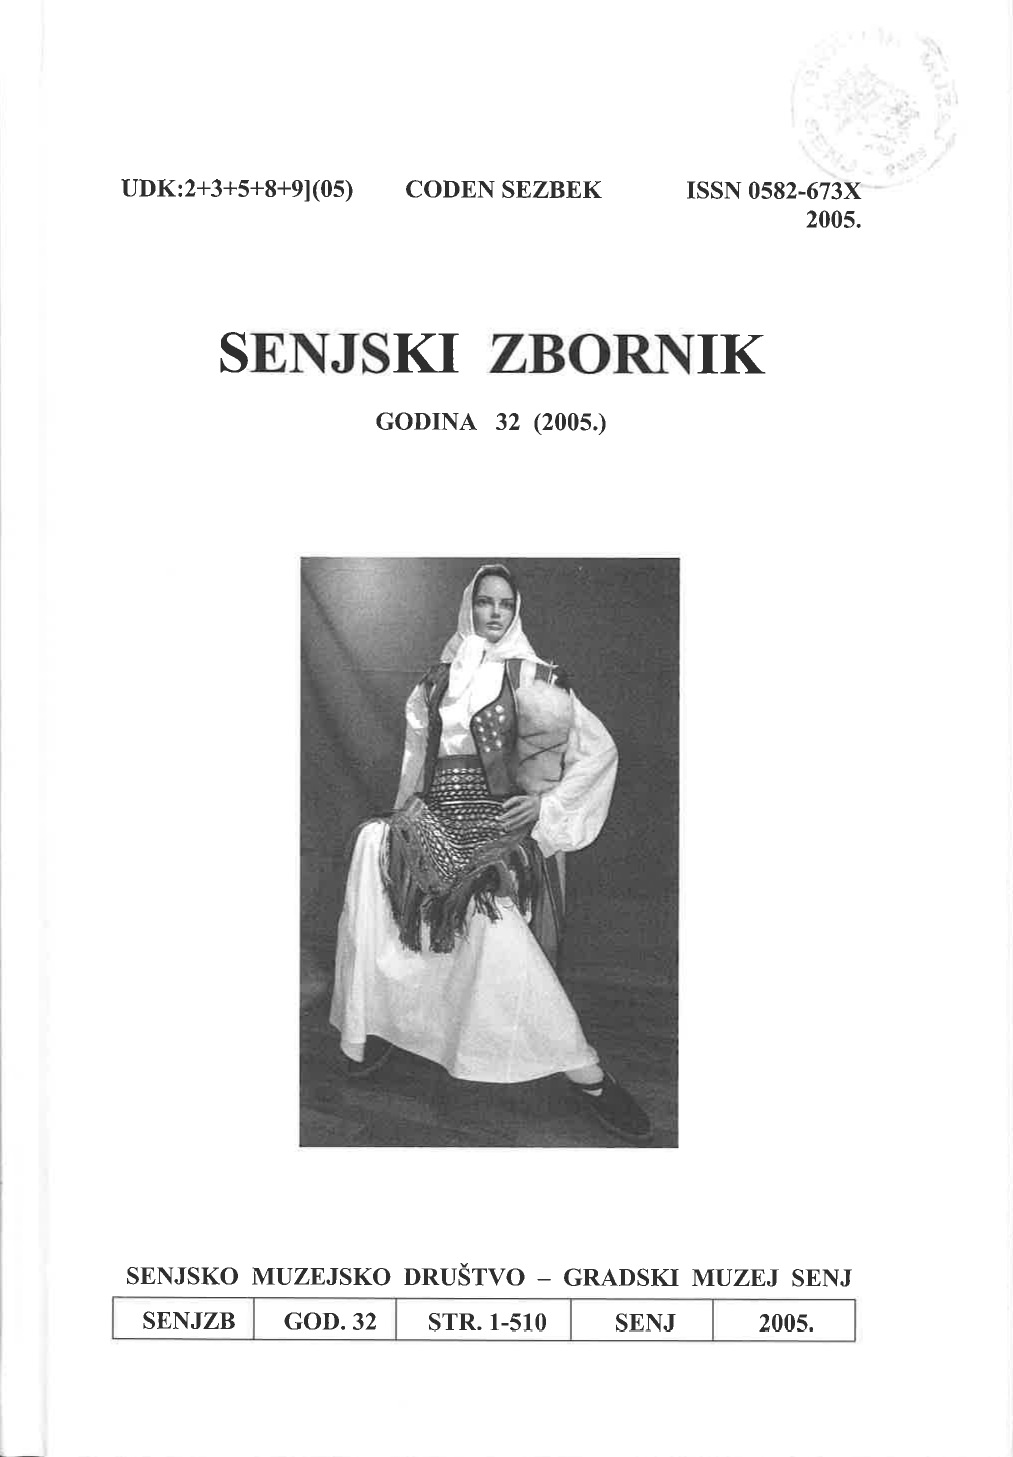 Wool Spinning (roving) in Krasno in Traditional and Contemporaneus Context Cover Image